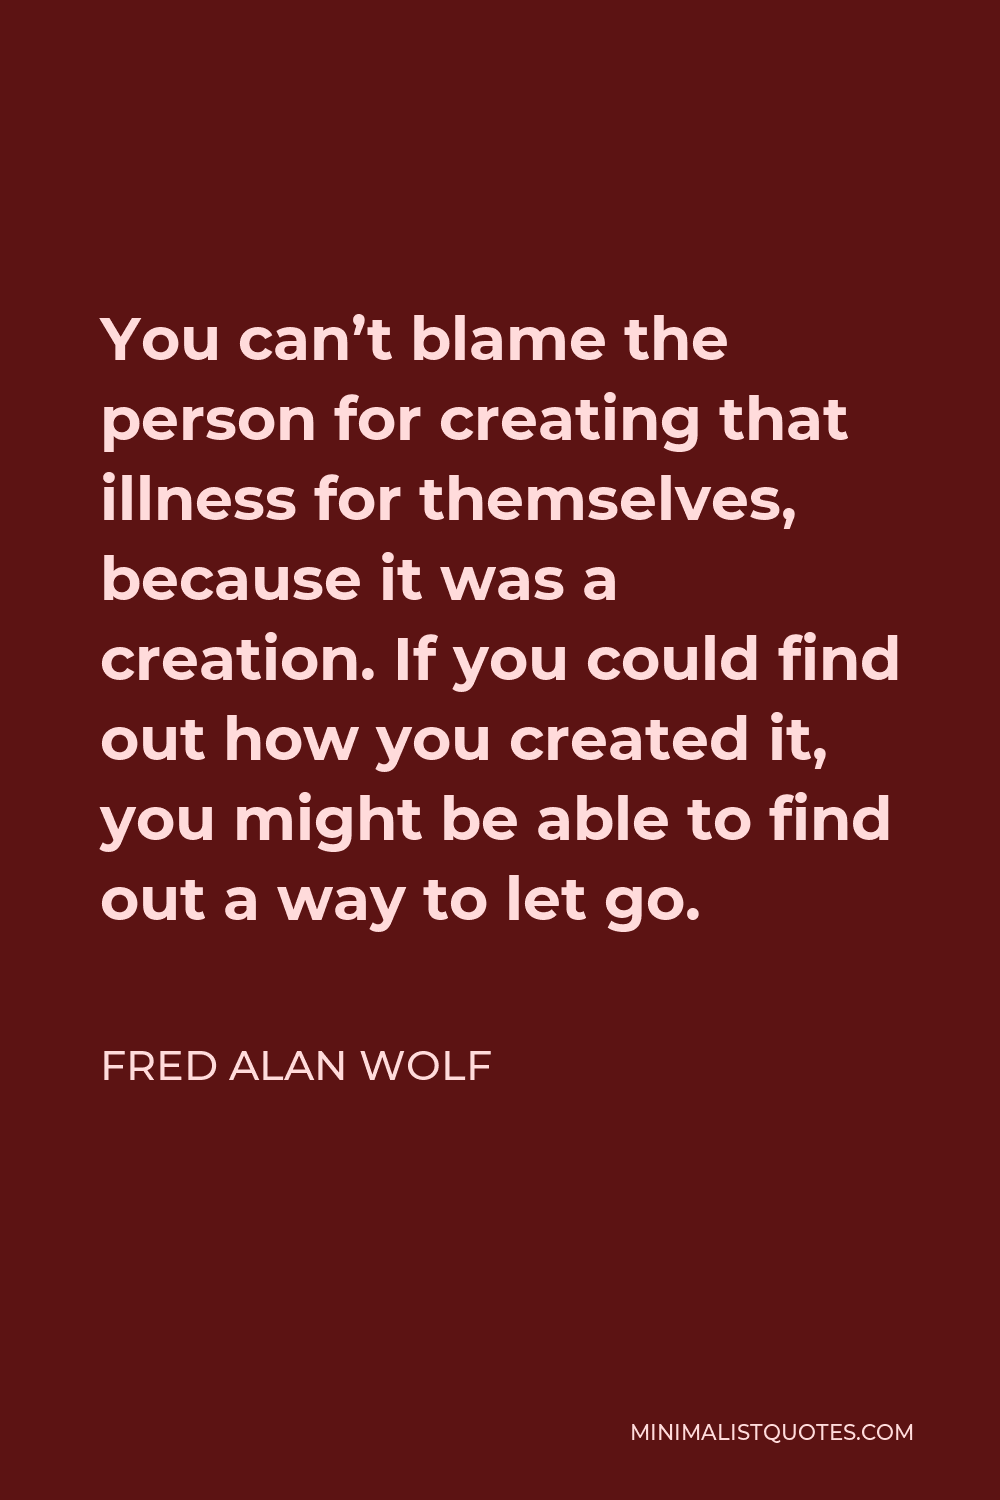 Fred Alan Wolf Quote - You can’t blame the person for creating that illness for themselves, because it was a creation. If you could find out how you created it, you might be able to find out a way to let go.